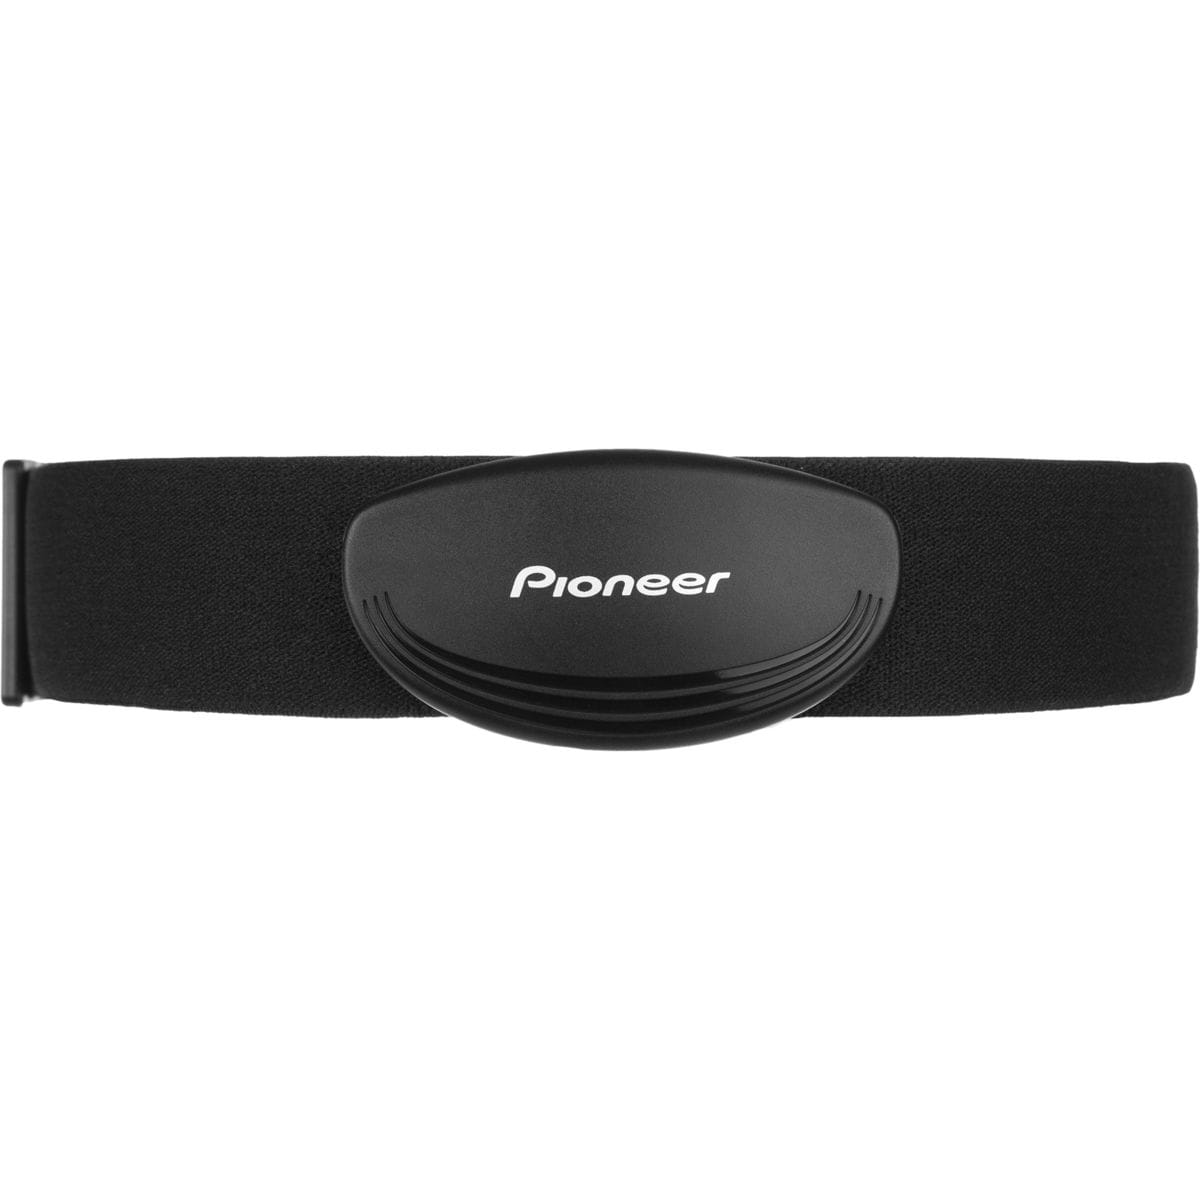 Pioneer Ant Heart Rate Monitor